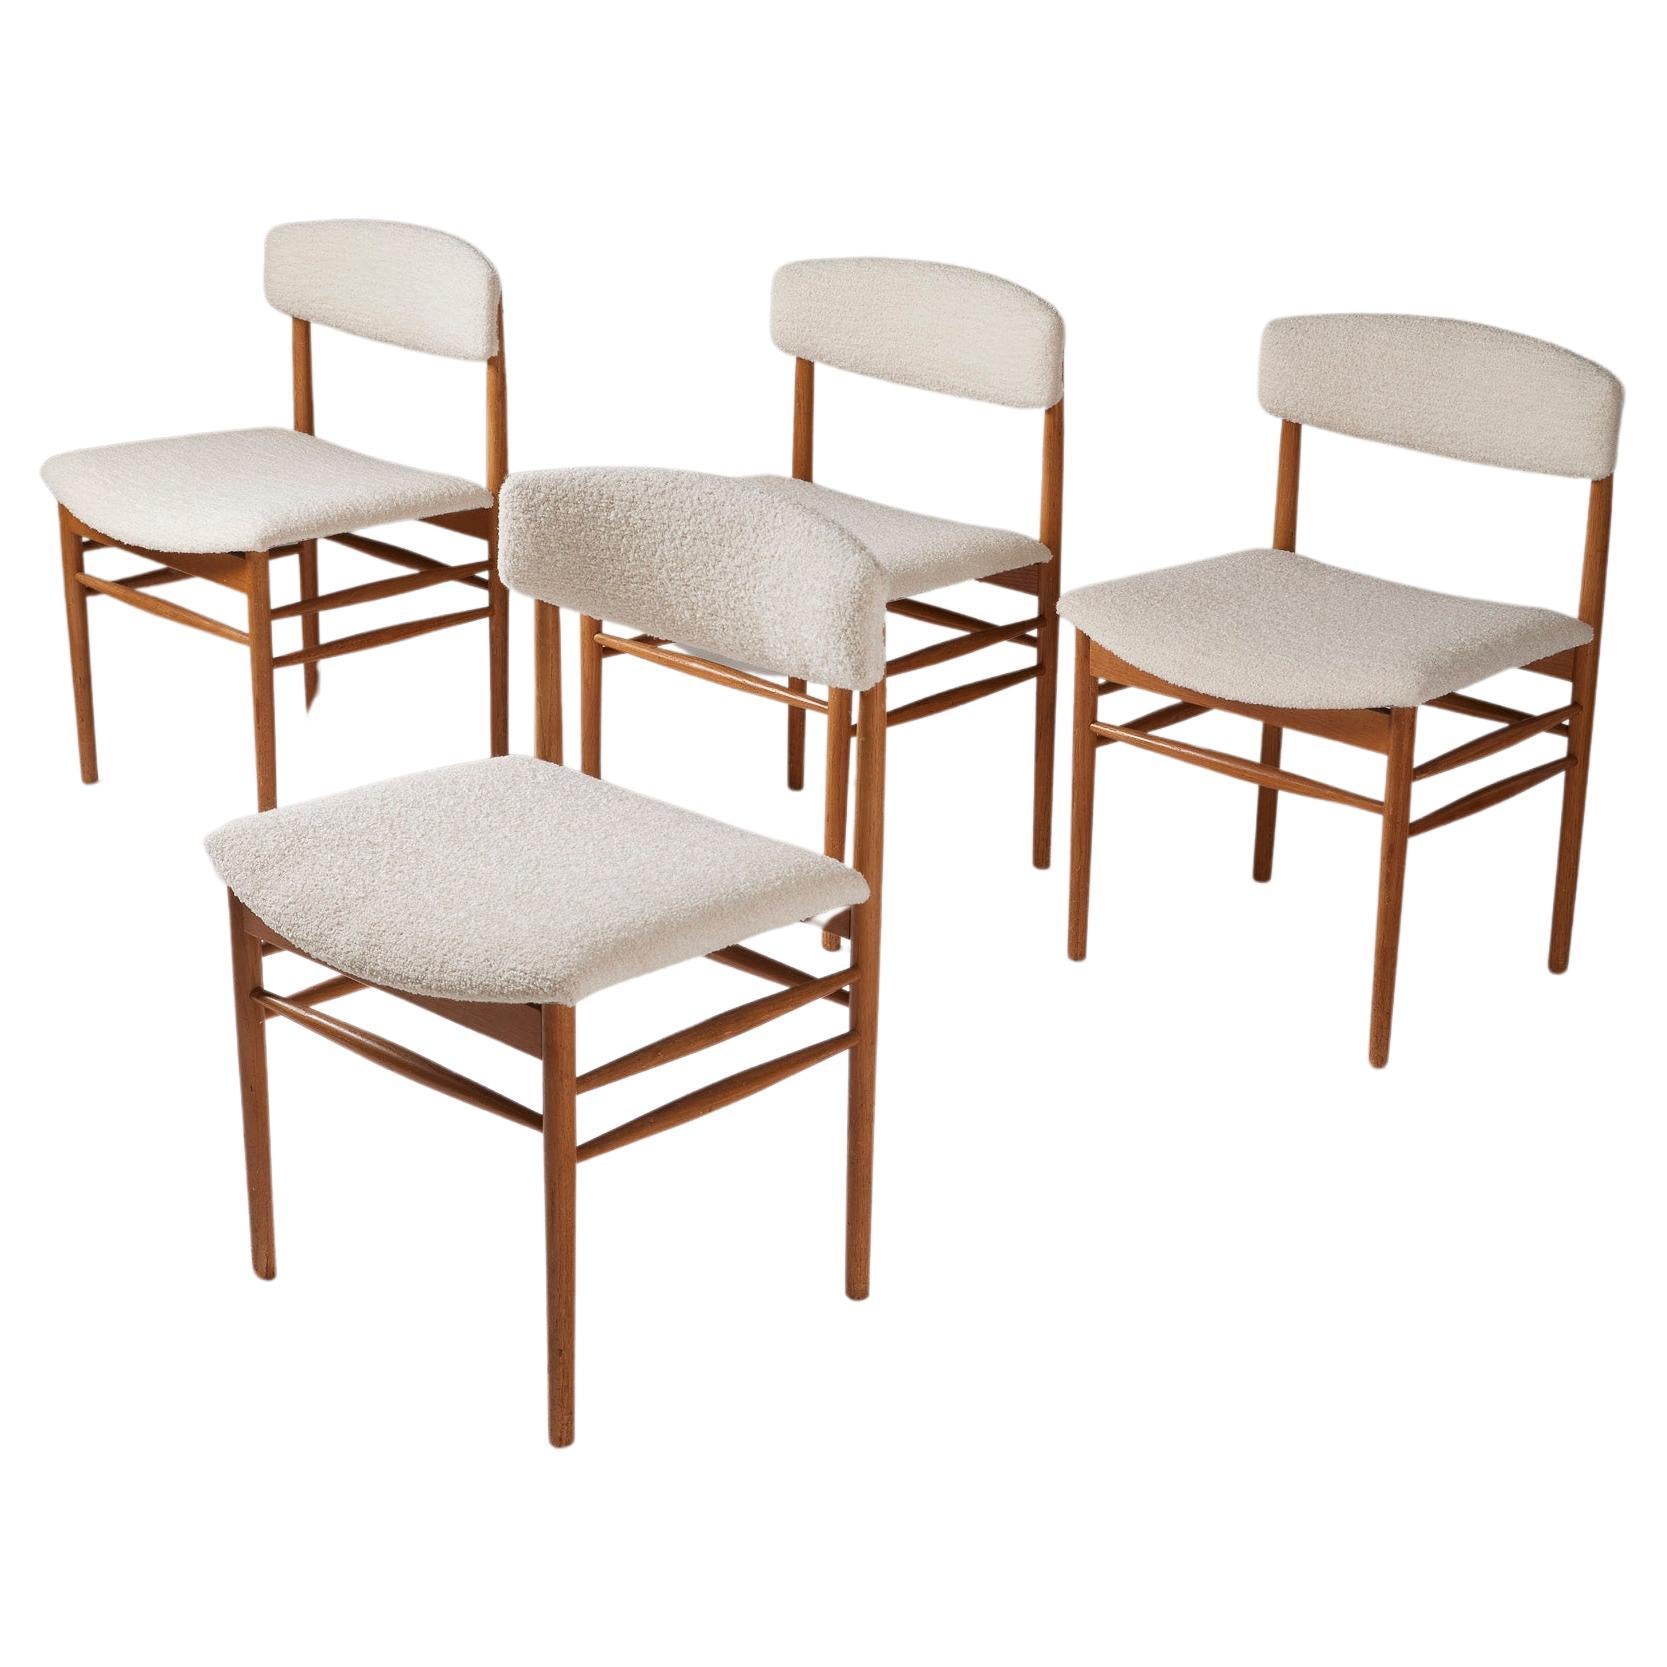  Set of 4 chairs in wood and bouclette For Sale